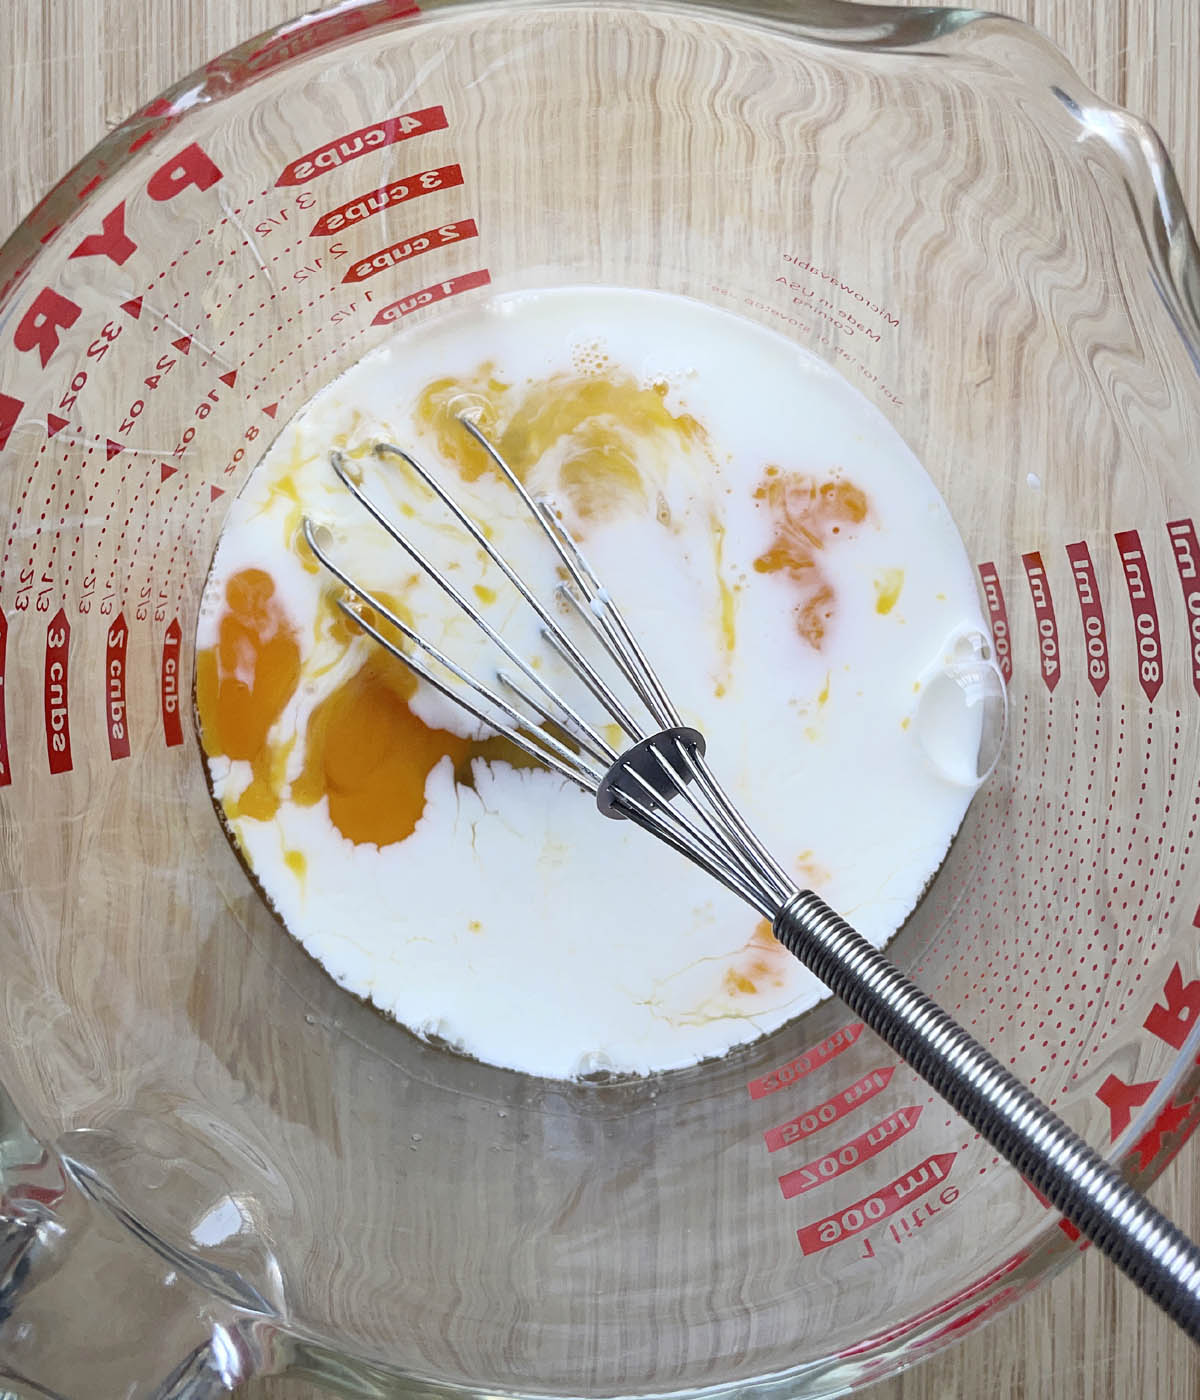 A metal whisk resting in a large glass measuring cup containing white milk and egg yolks.